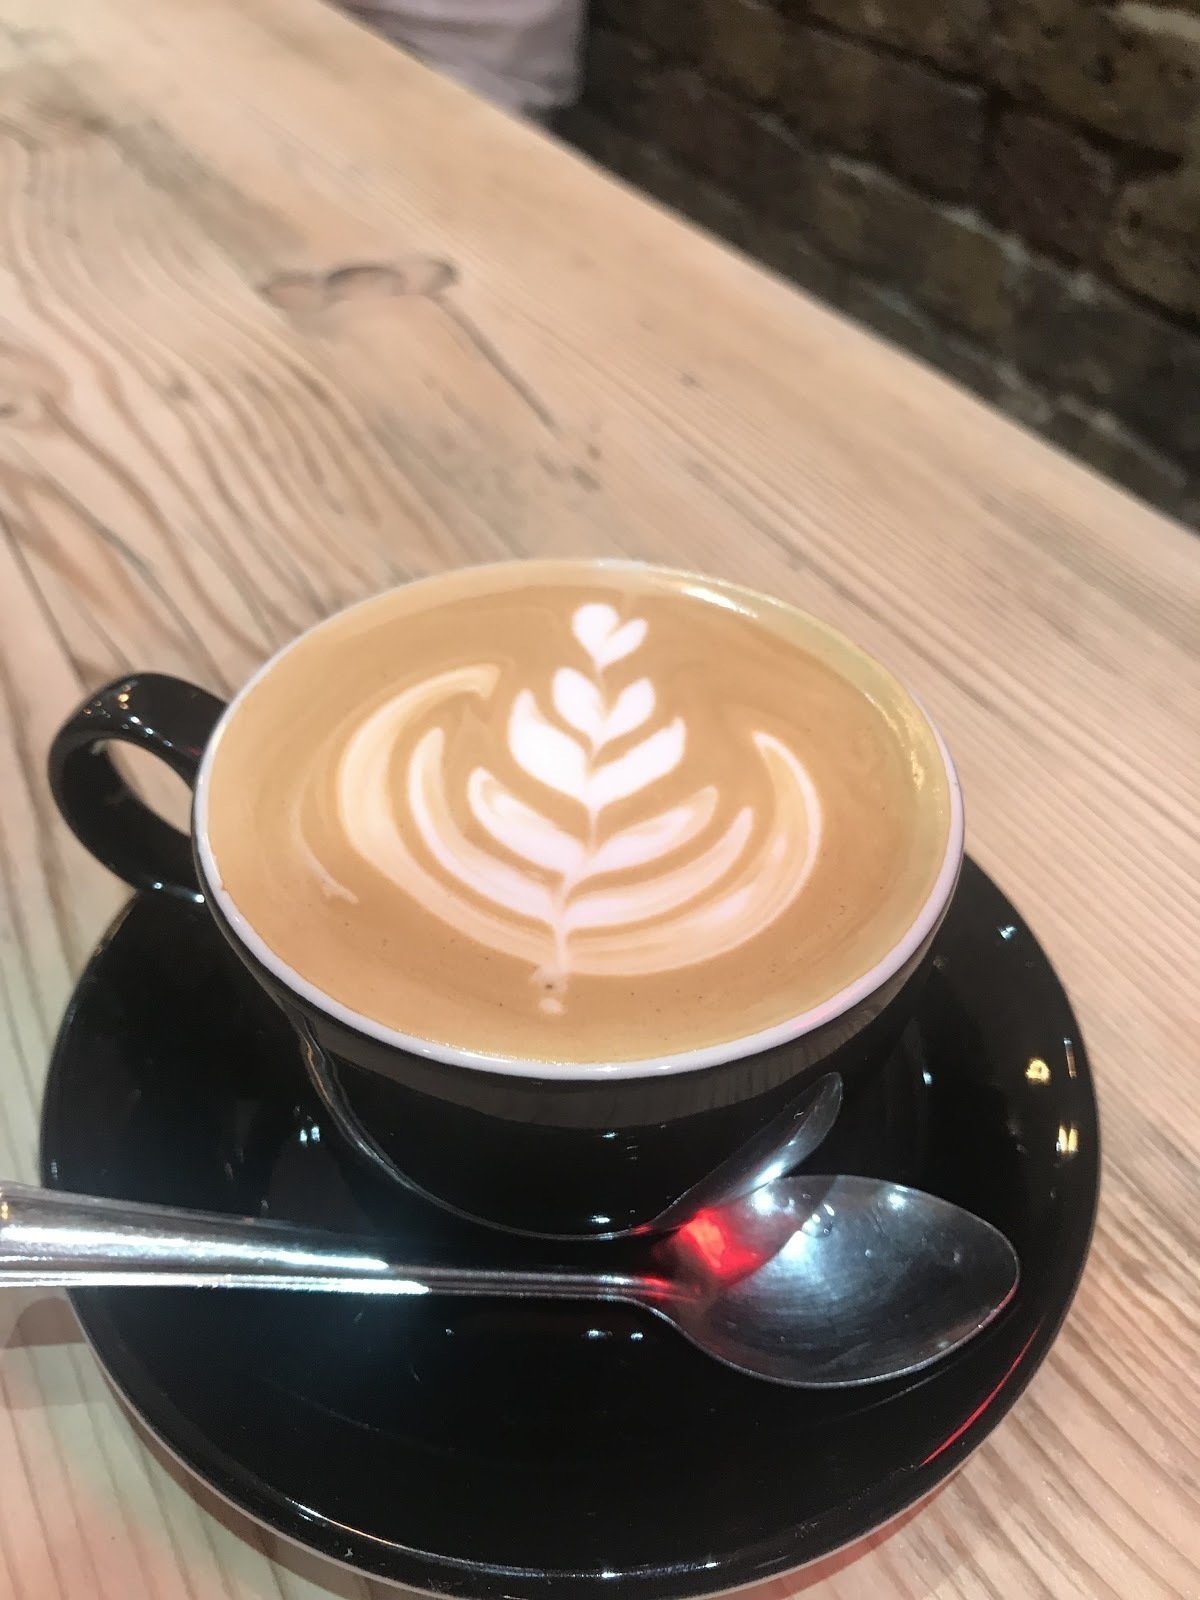 <span class="translation_missing" title="translation missing: en.meta.location_title, location_name: Ditto Coffee, city: London">Location Title</span>